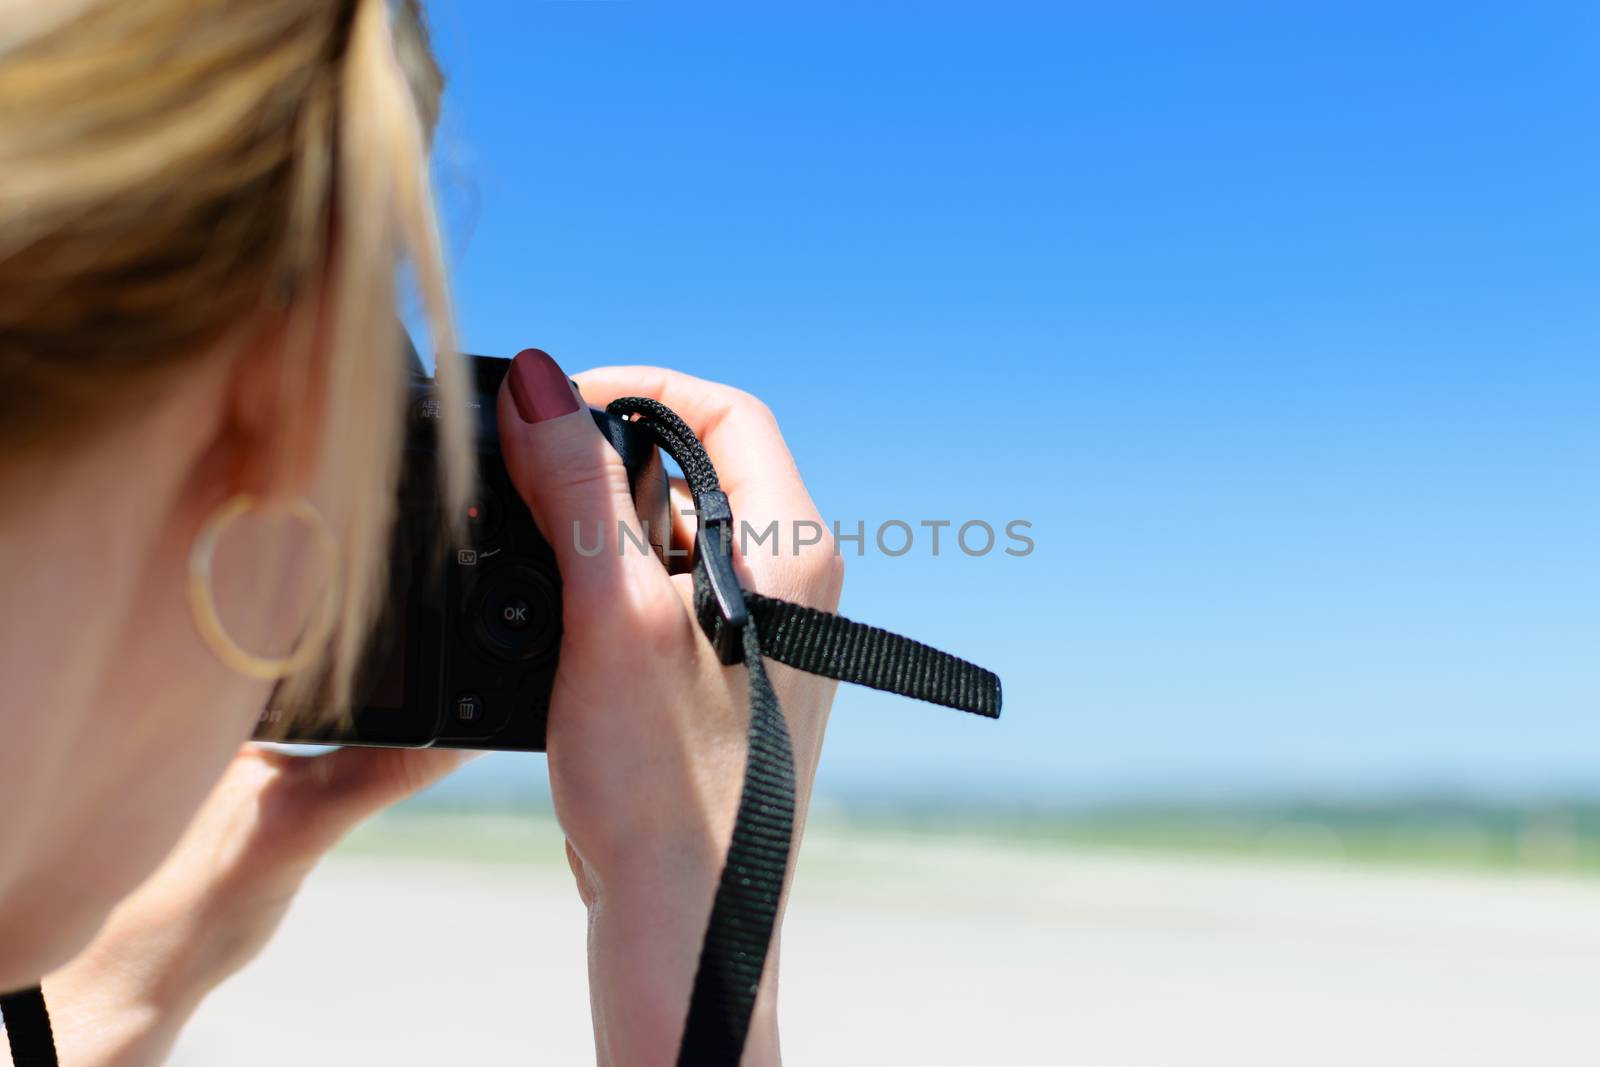 Beautiful young woman shoots a photo on the beach with a professional DSLR camera.